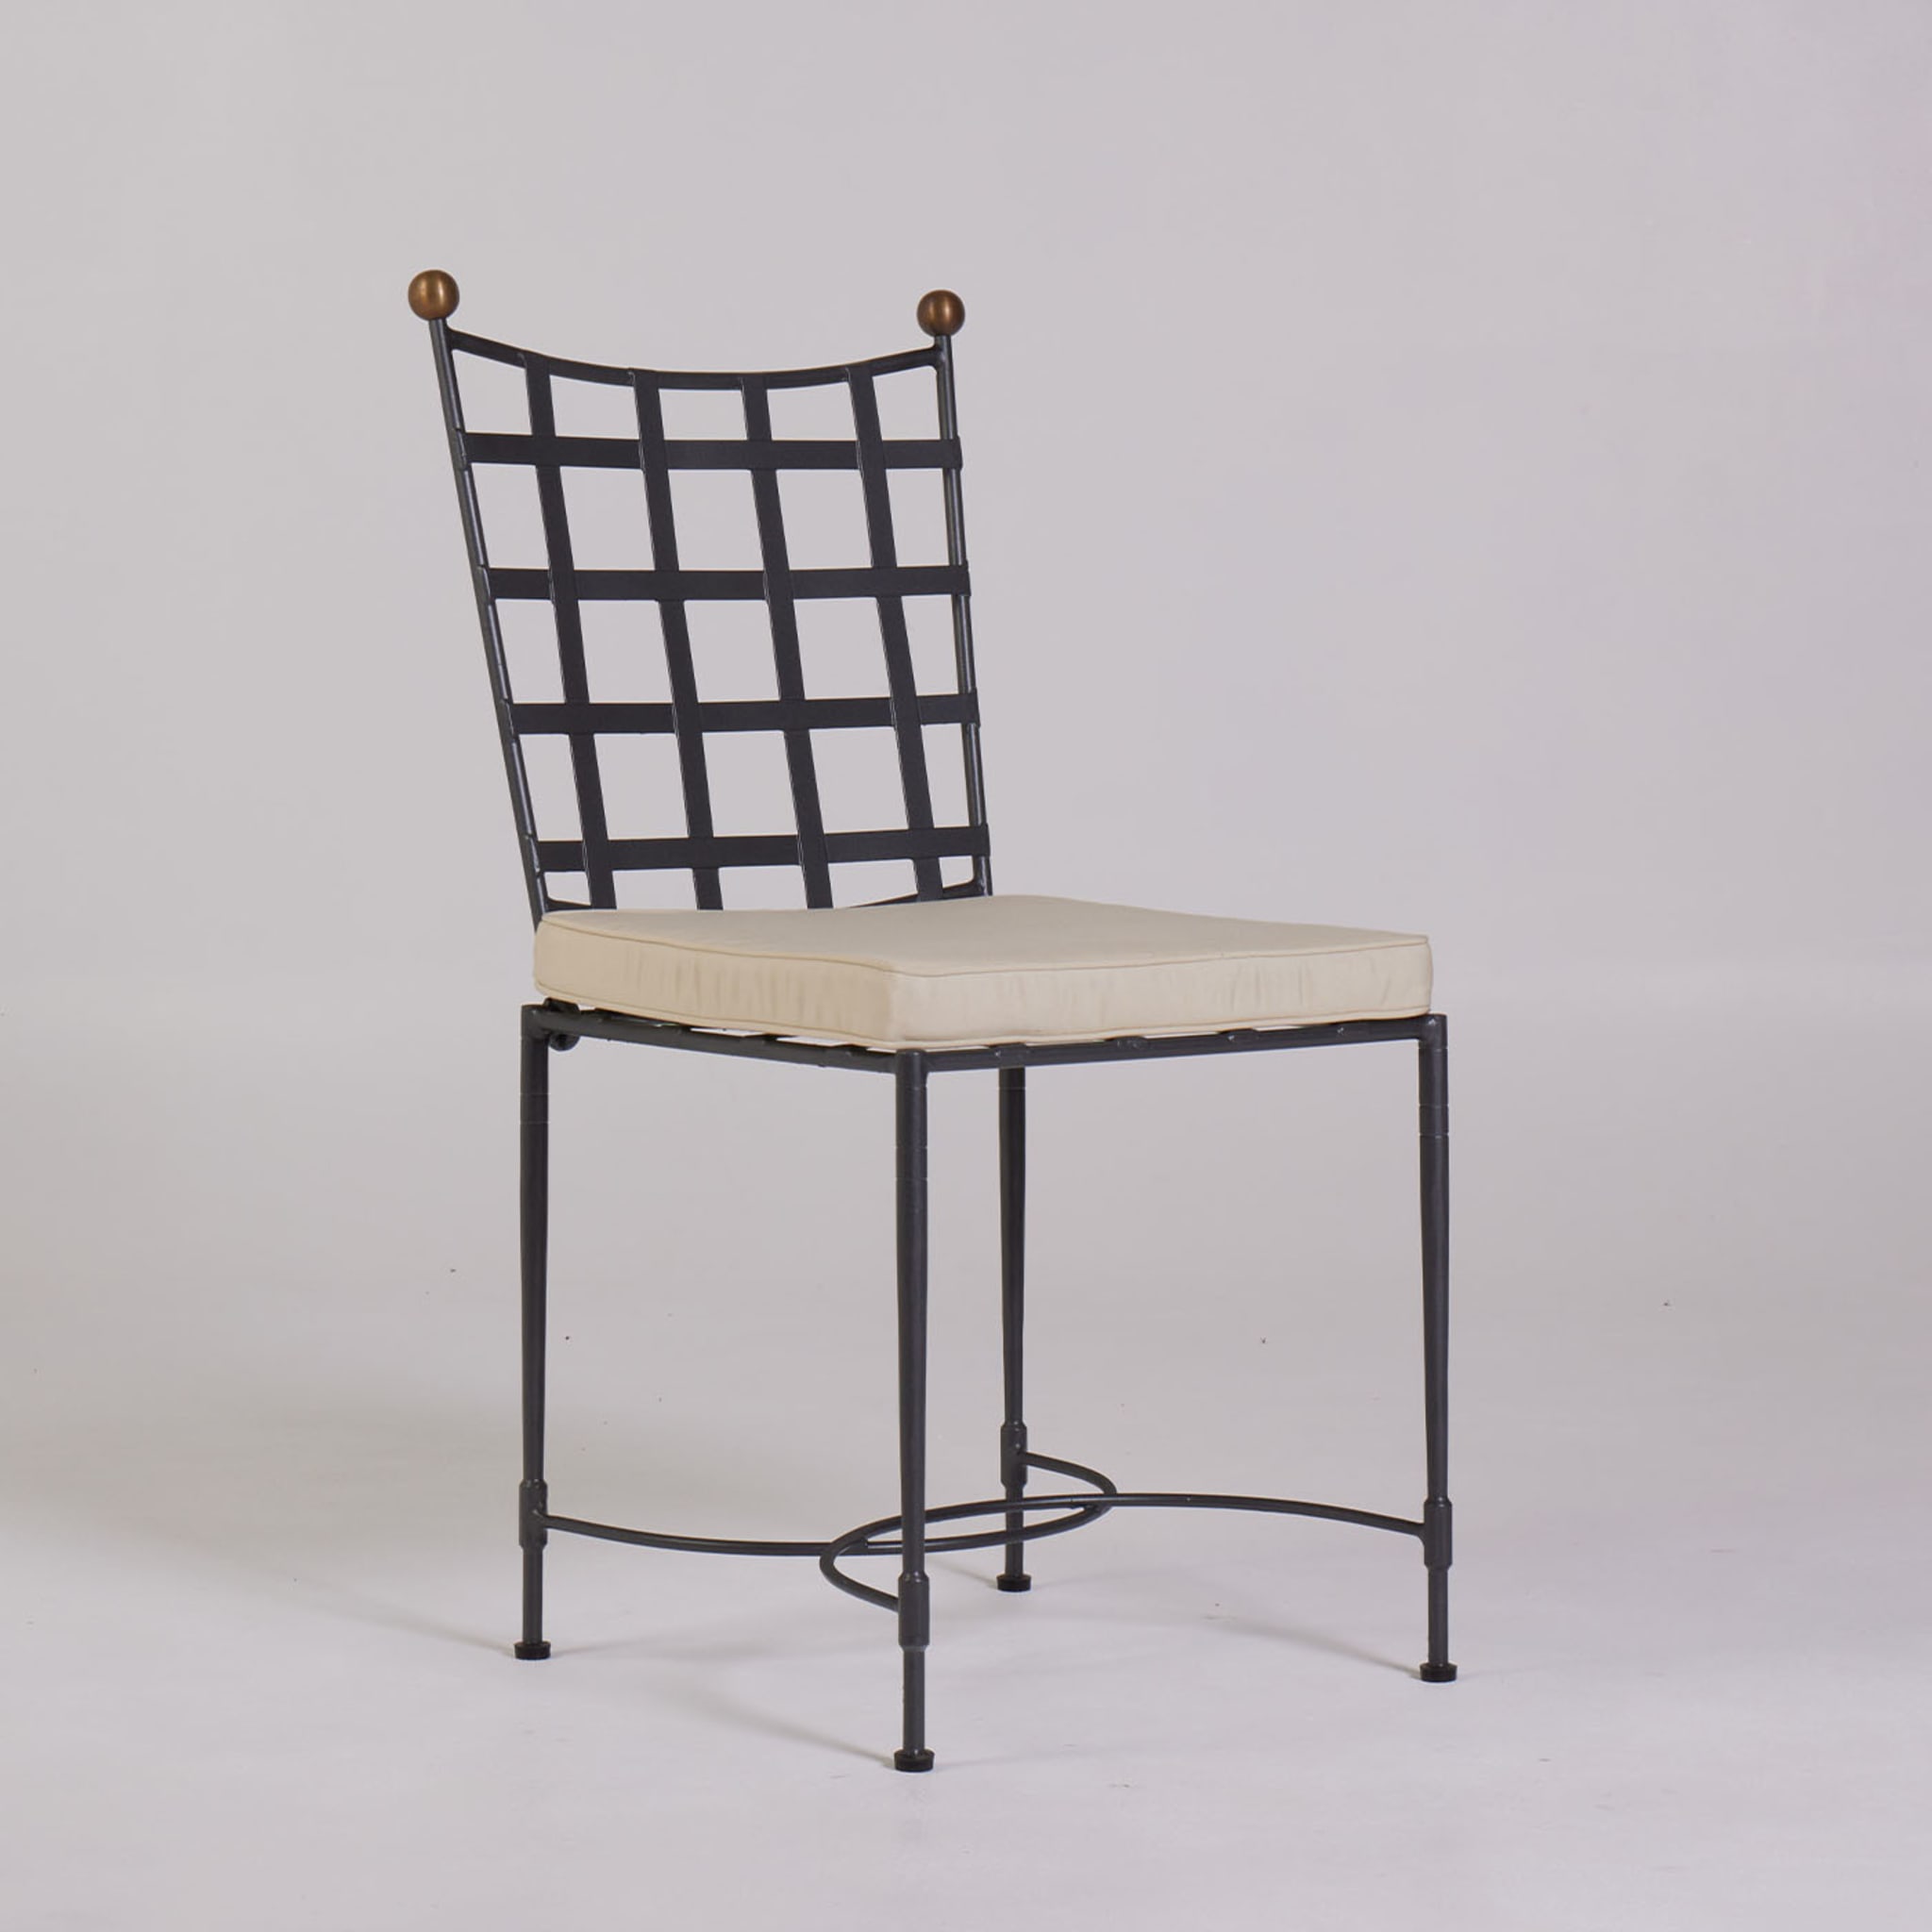 Crossweave Cushioned Wrought-Iron Chair  - Alternative view 2